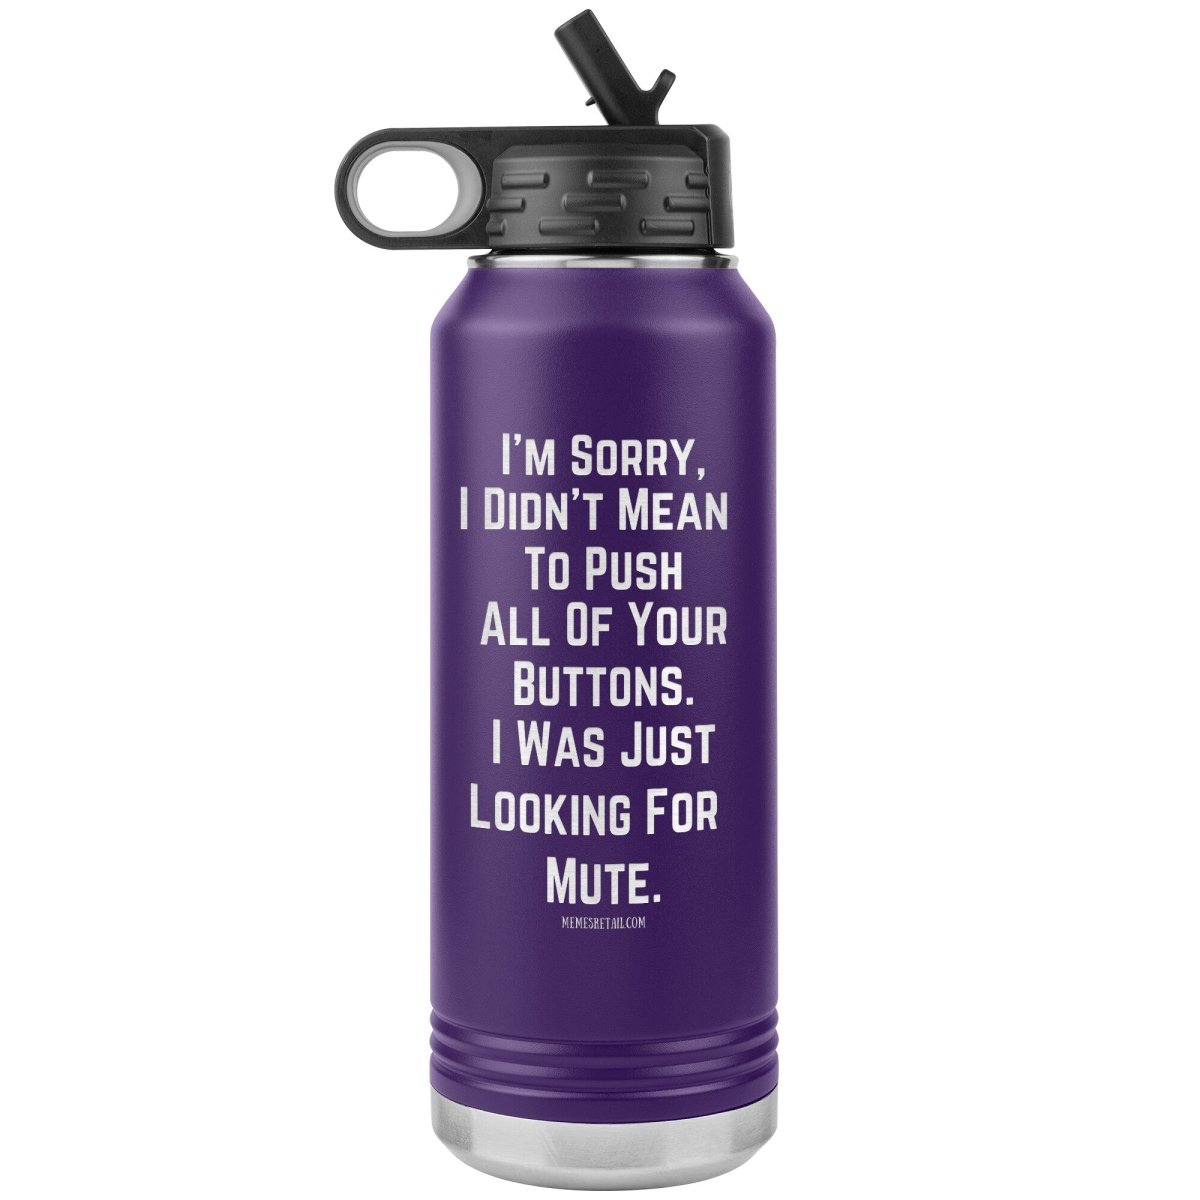 I’m sorry, I didn’t mean to push all your buttons, I was just looking for mute 32 oz water tumbler, Purple - MemesRetail.com